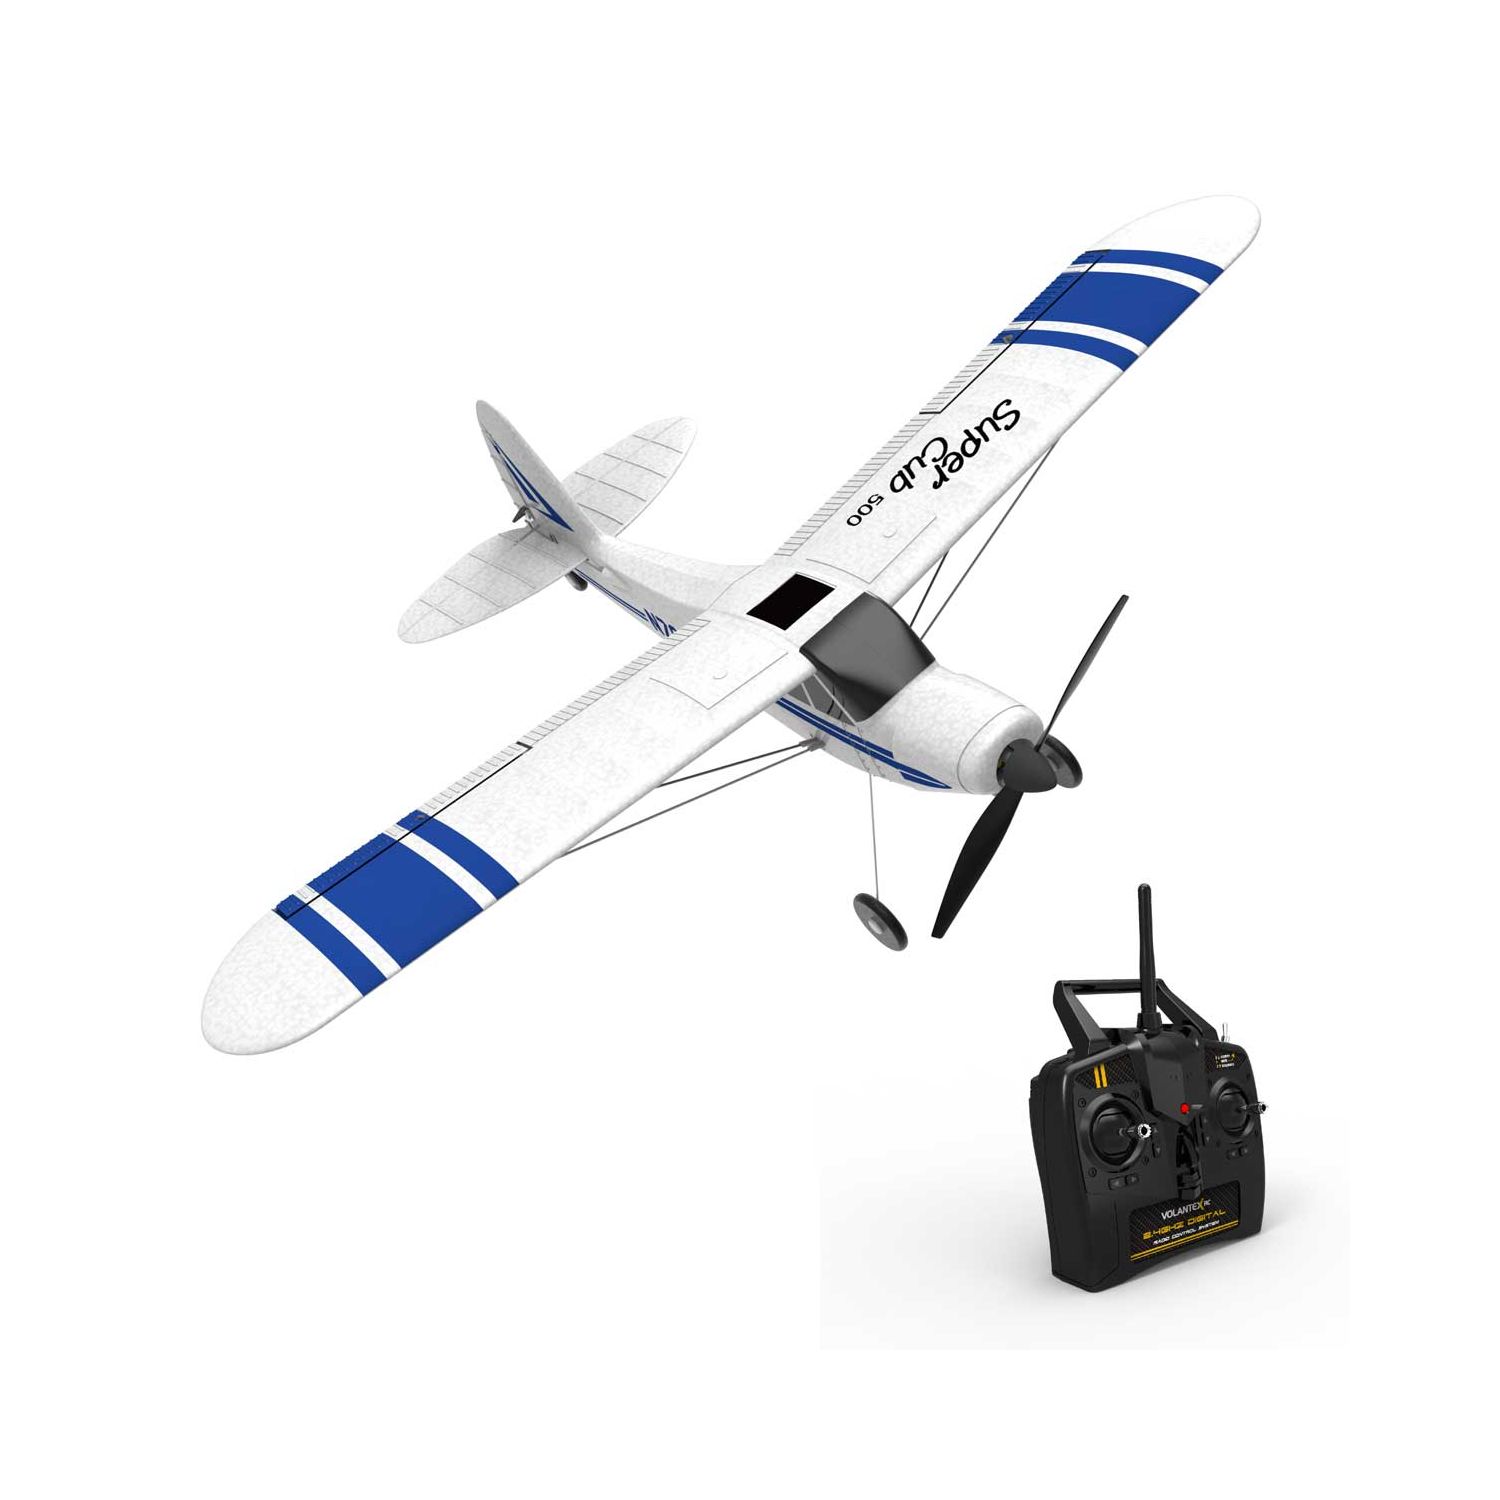 EX-Hobby Super Cub 500 Beginner Airplane with 6-Axis Gyro System and 500mm Wingspan (761-3) Ready-To-Fly Out Of box